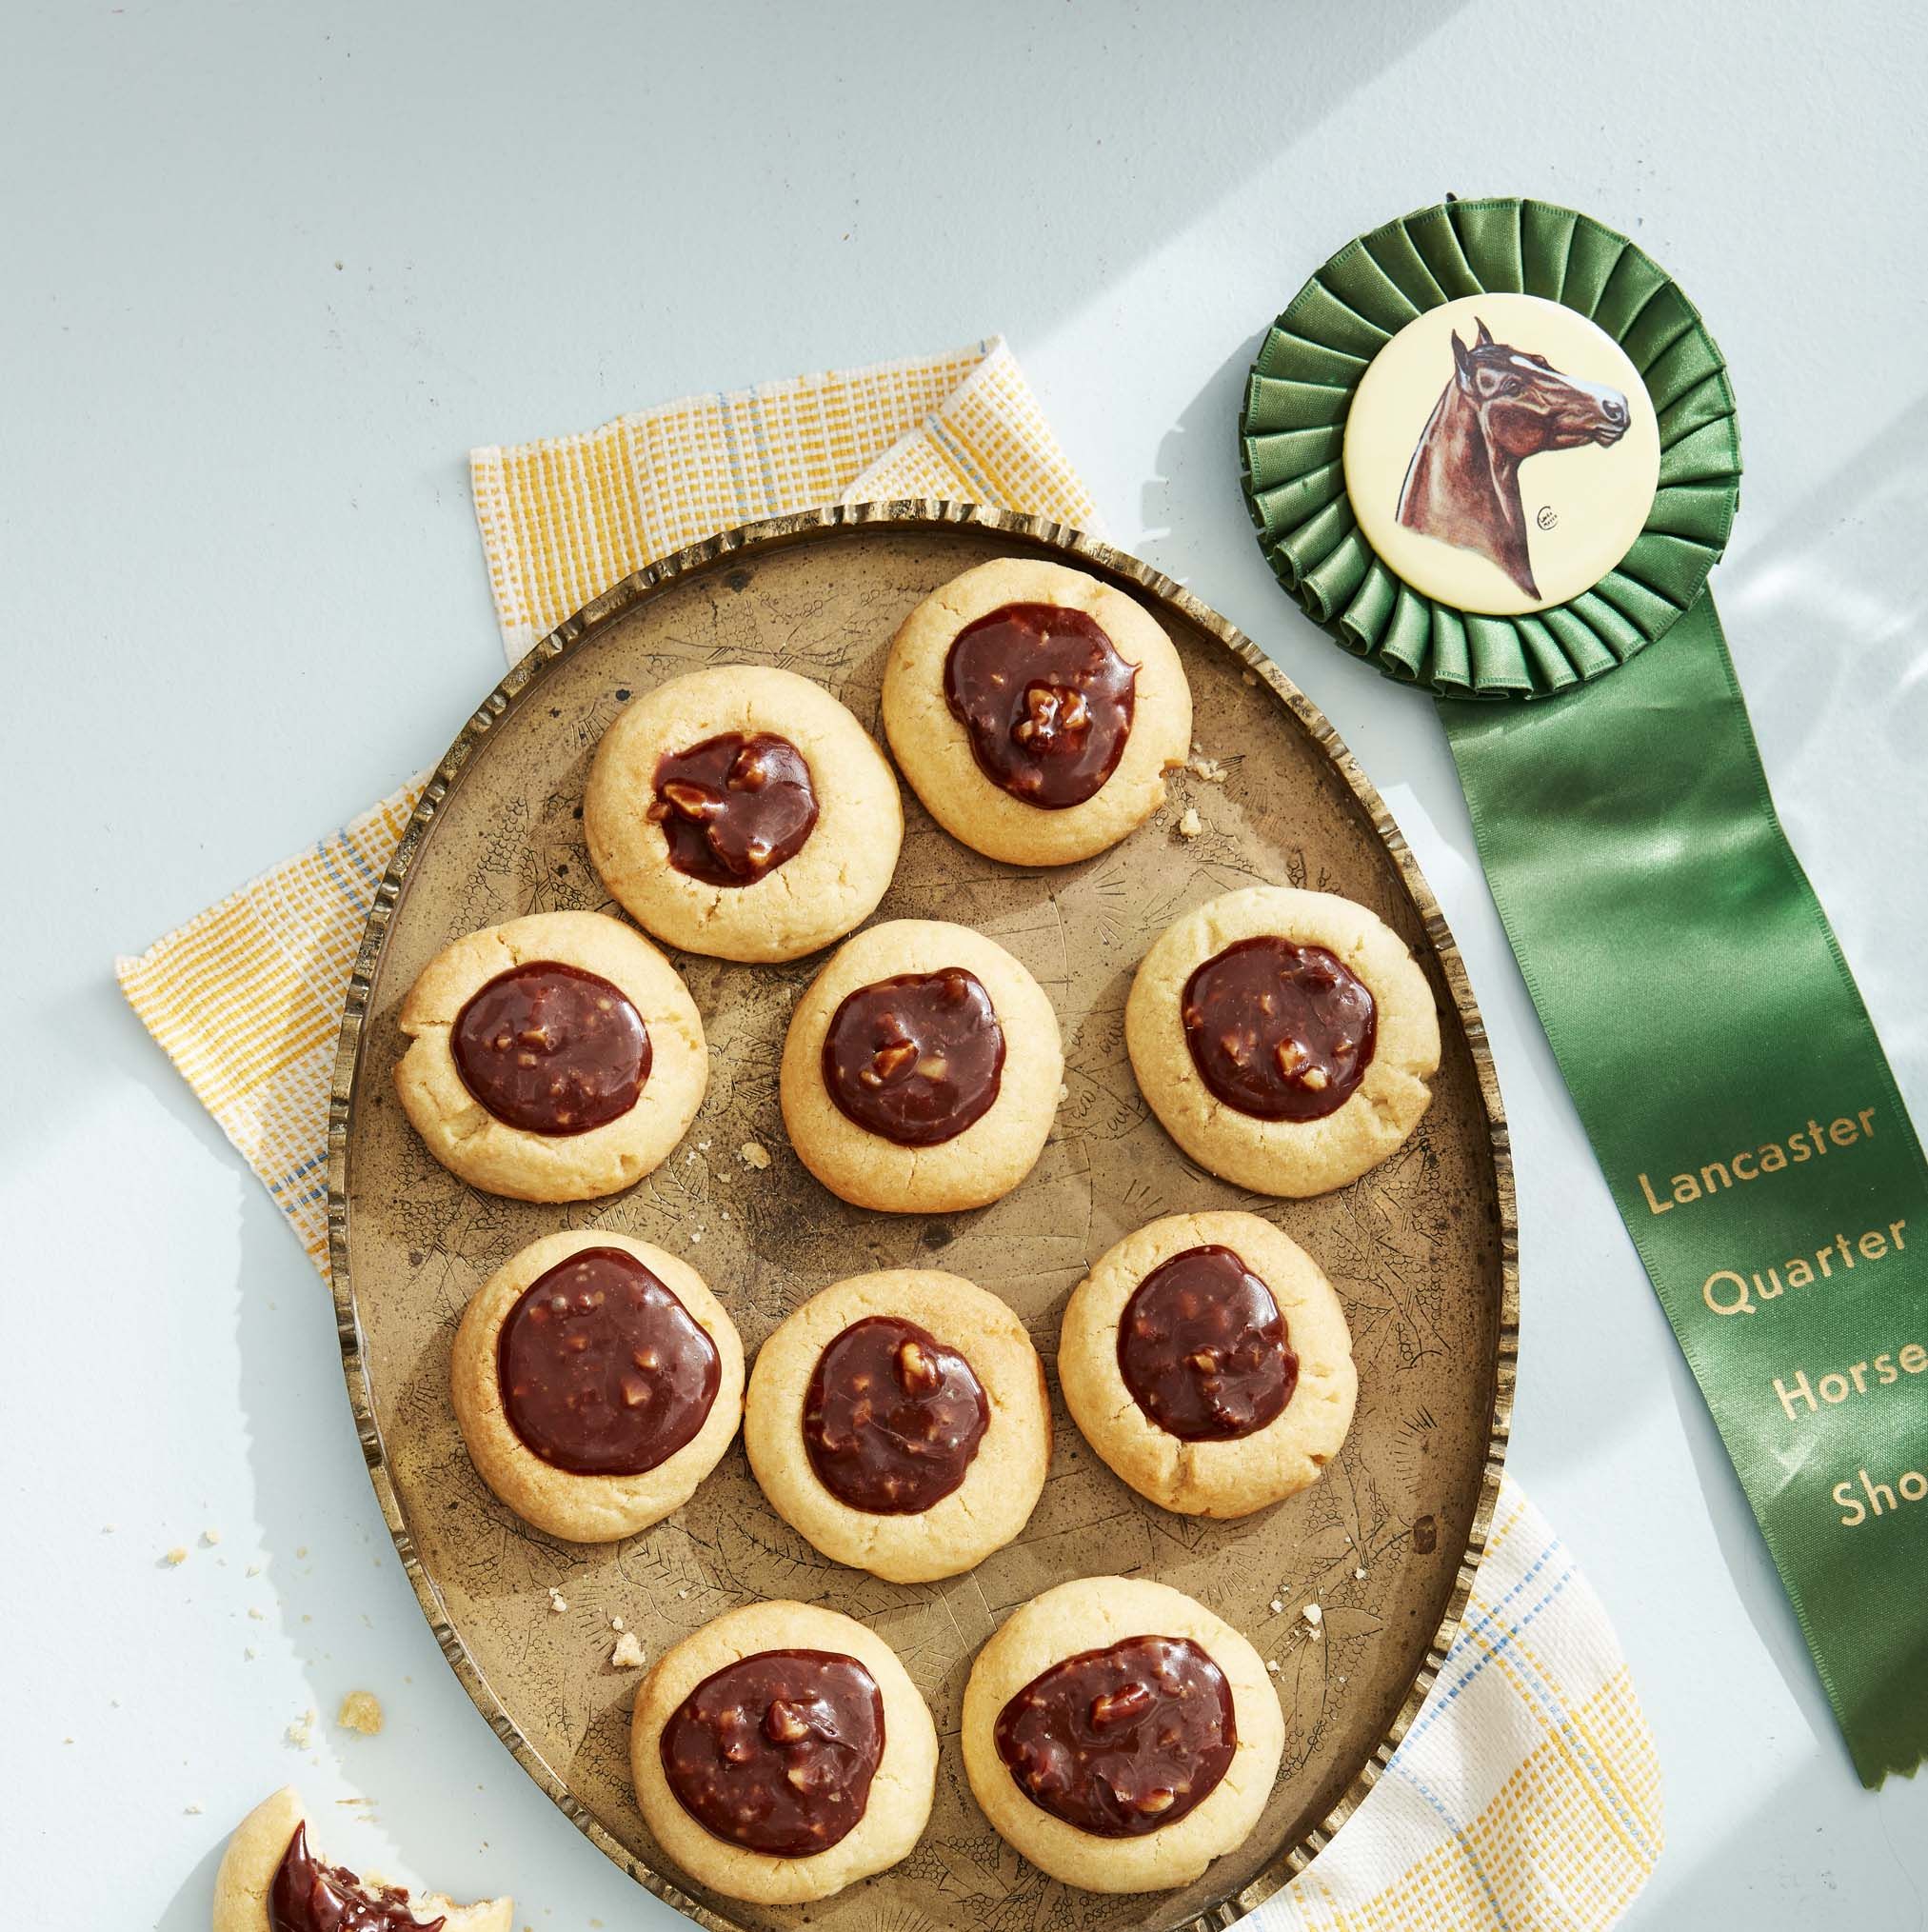 26 Kentucky Derby-Inspired Recipes for a Winning Celebration